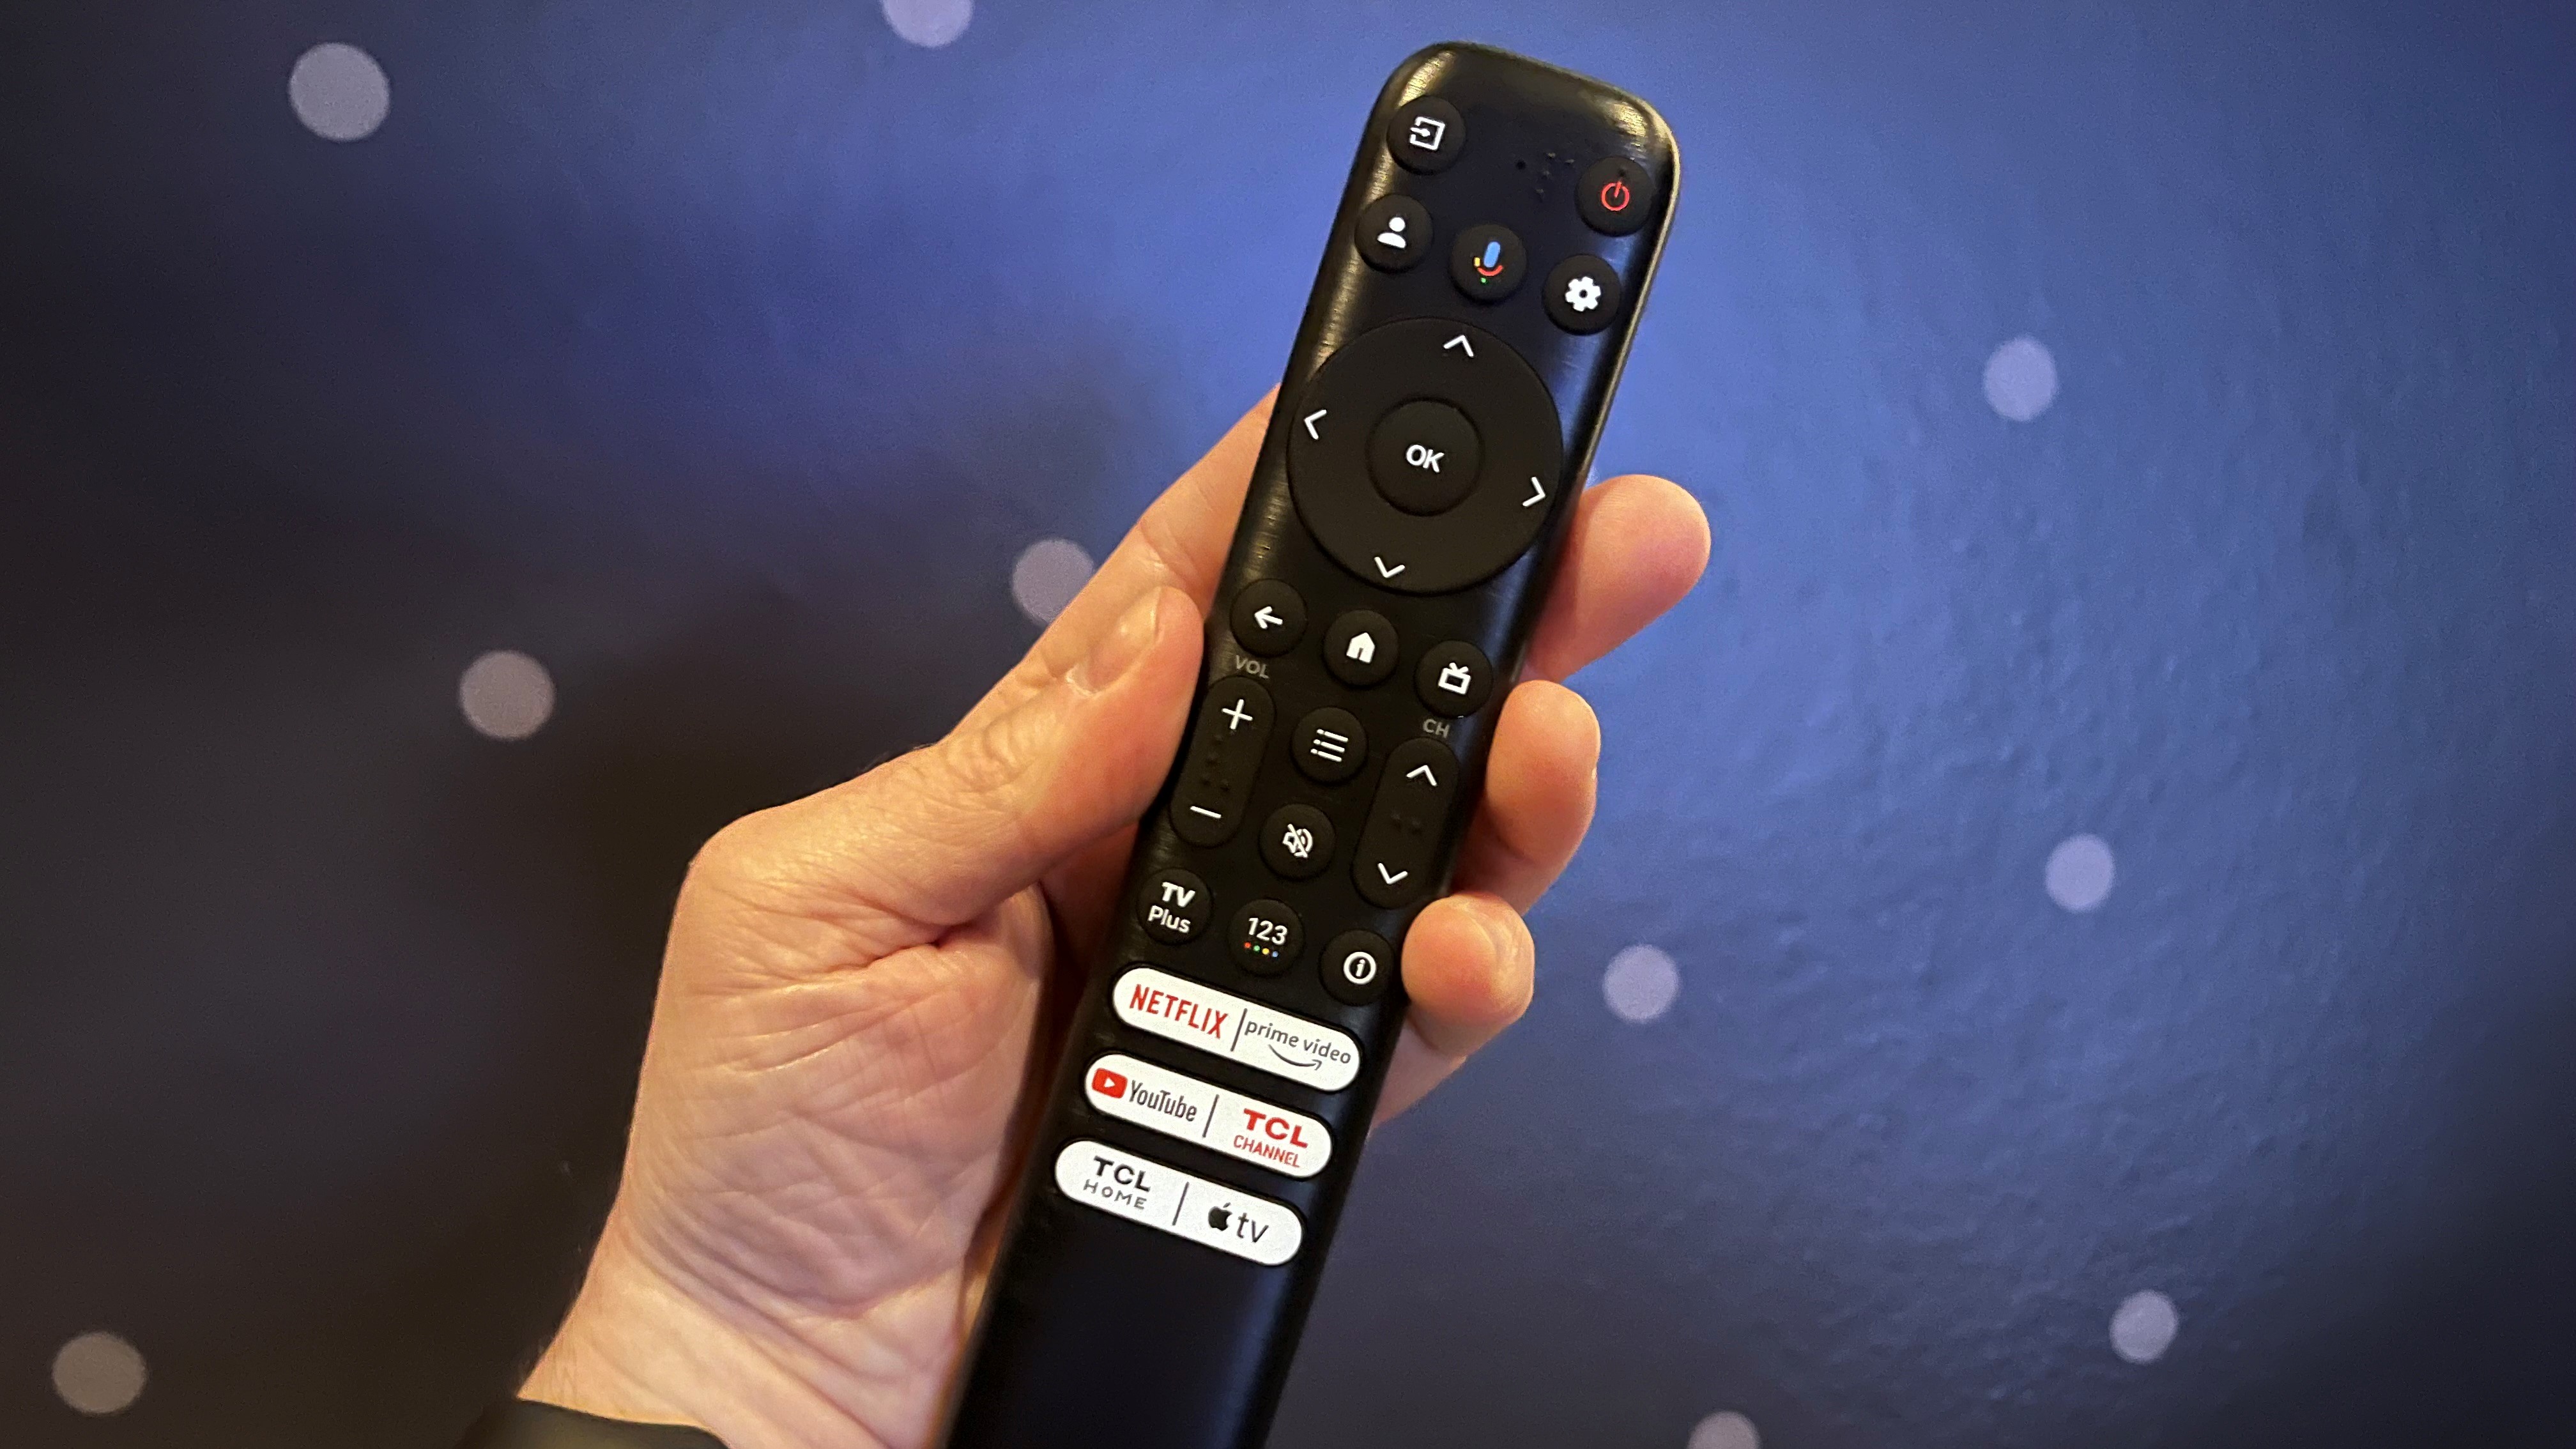 TCL QM8 remote control held in hand